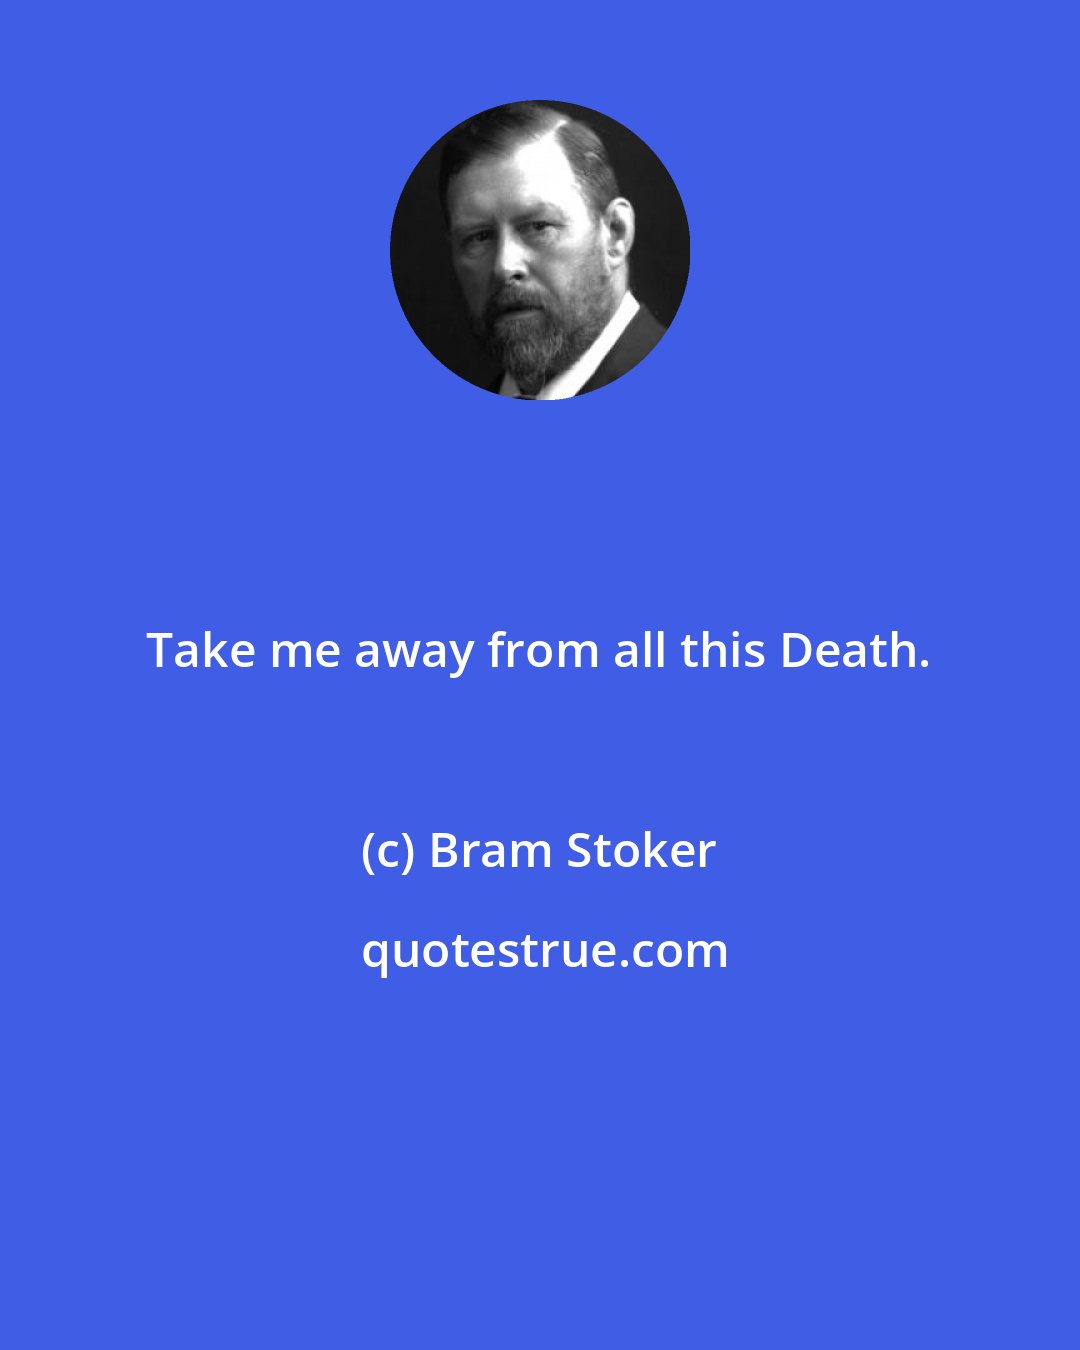 Bram Stoker: Take me away from all this Death.